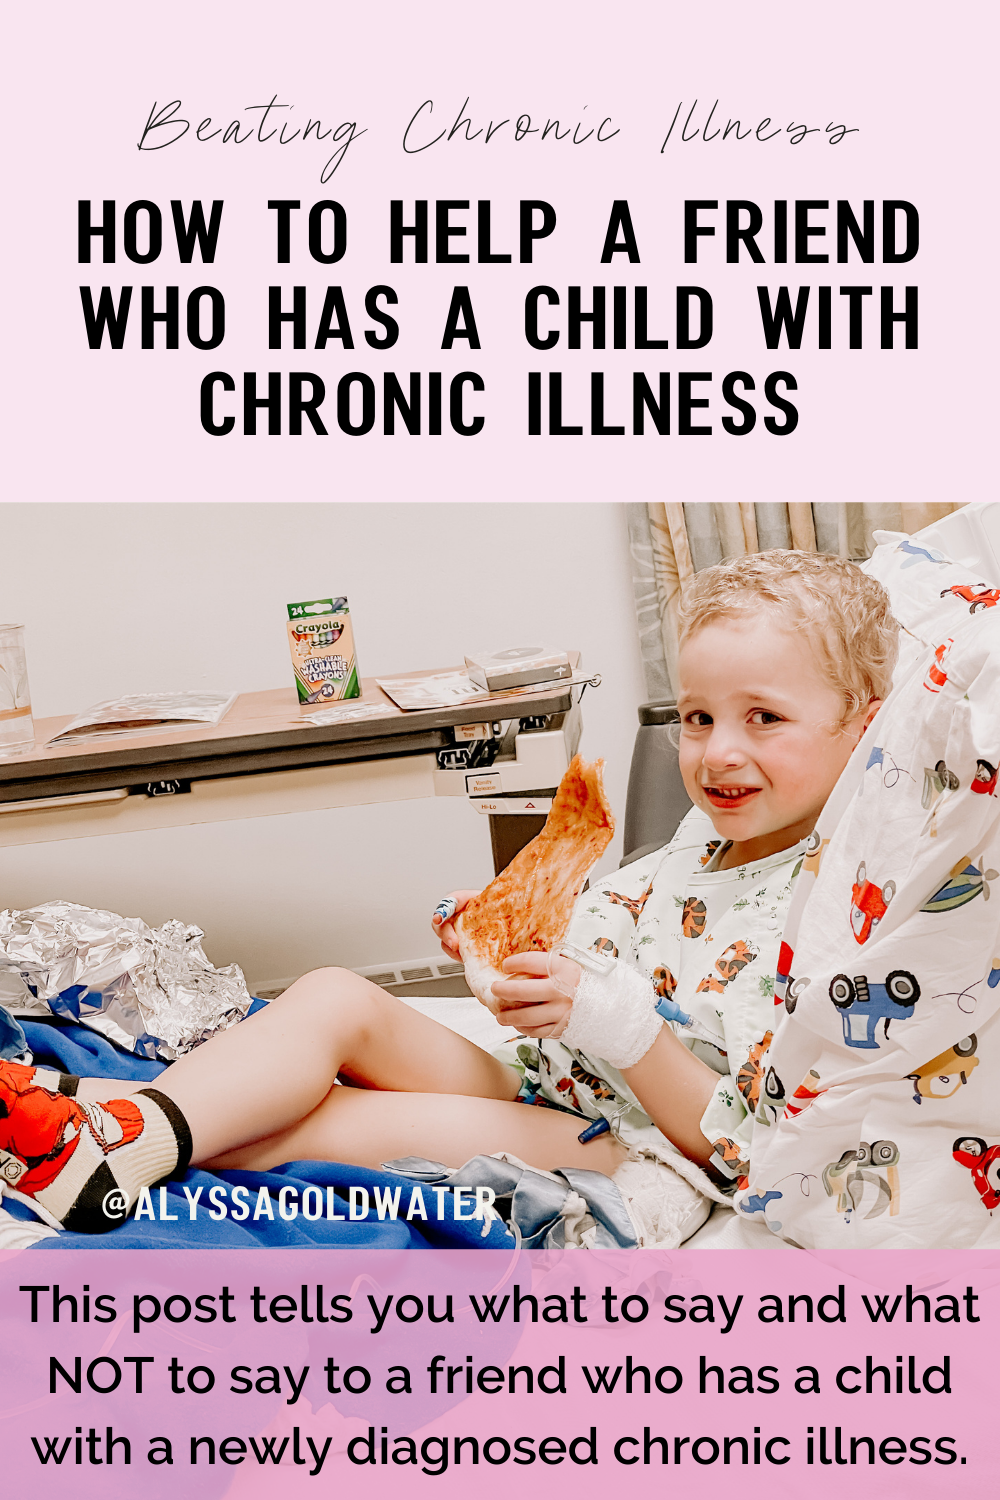 How to support a friend whose child has just been diagnosed with a chronic illness